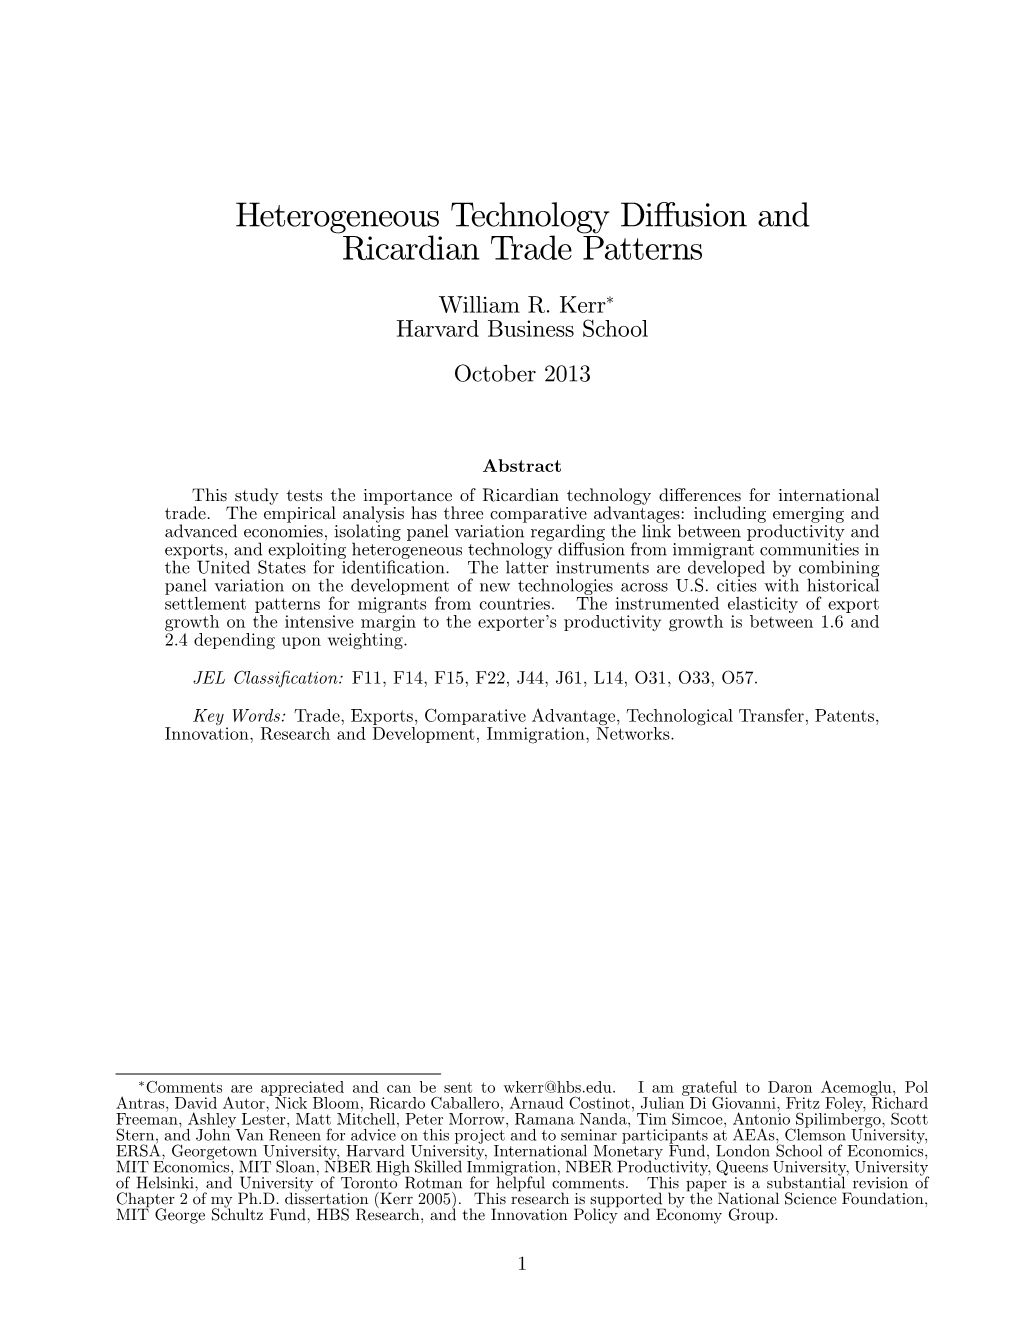 Heterogeneous Technology Diffusion and Ricardian Trade Patterns